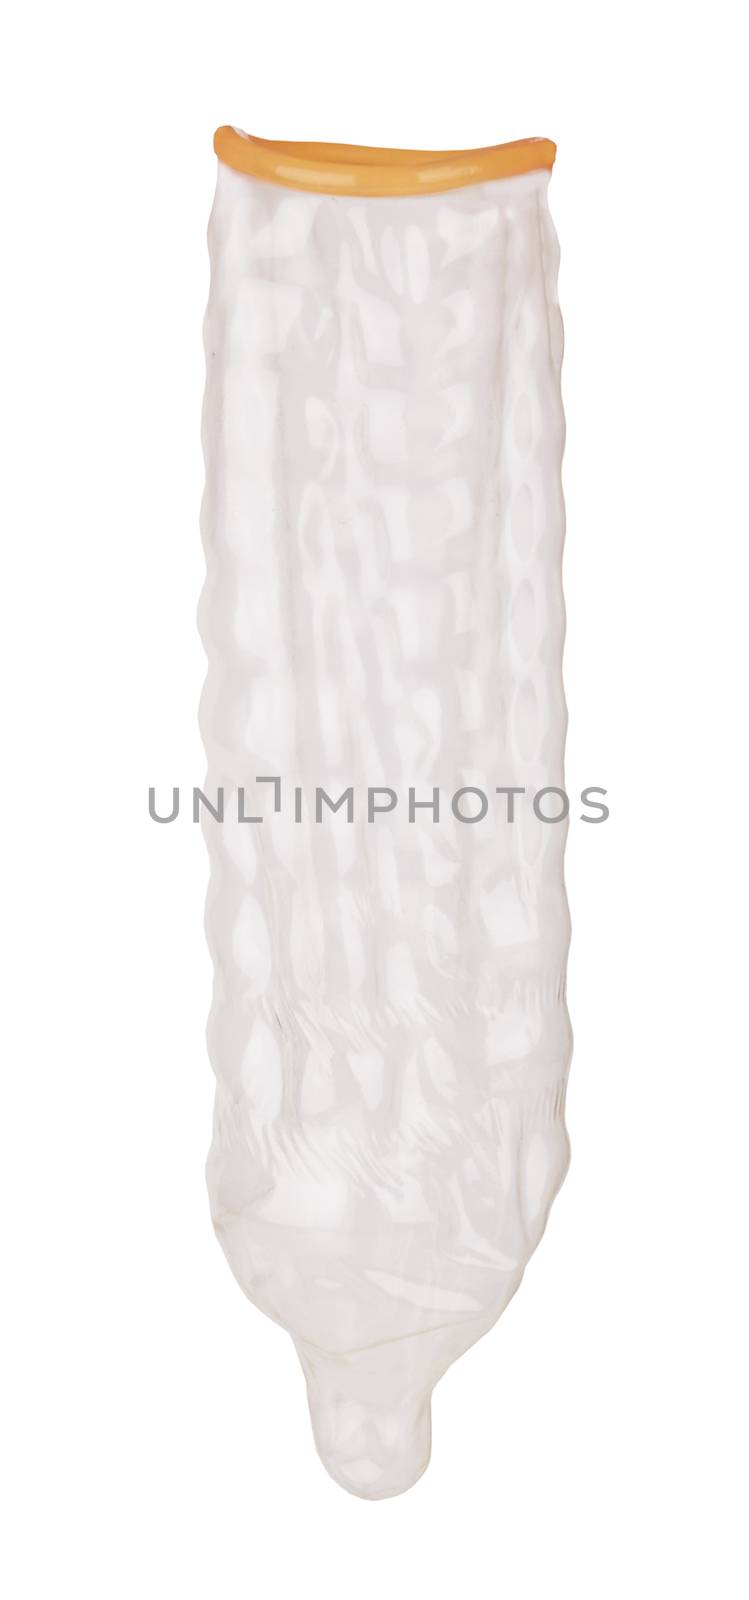 condom isolated on a white 